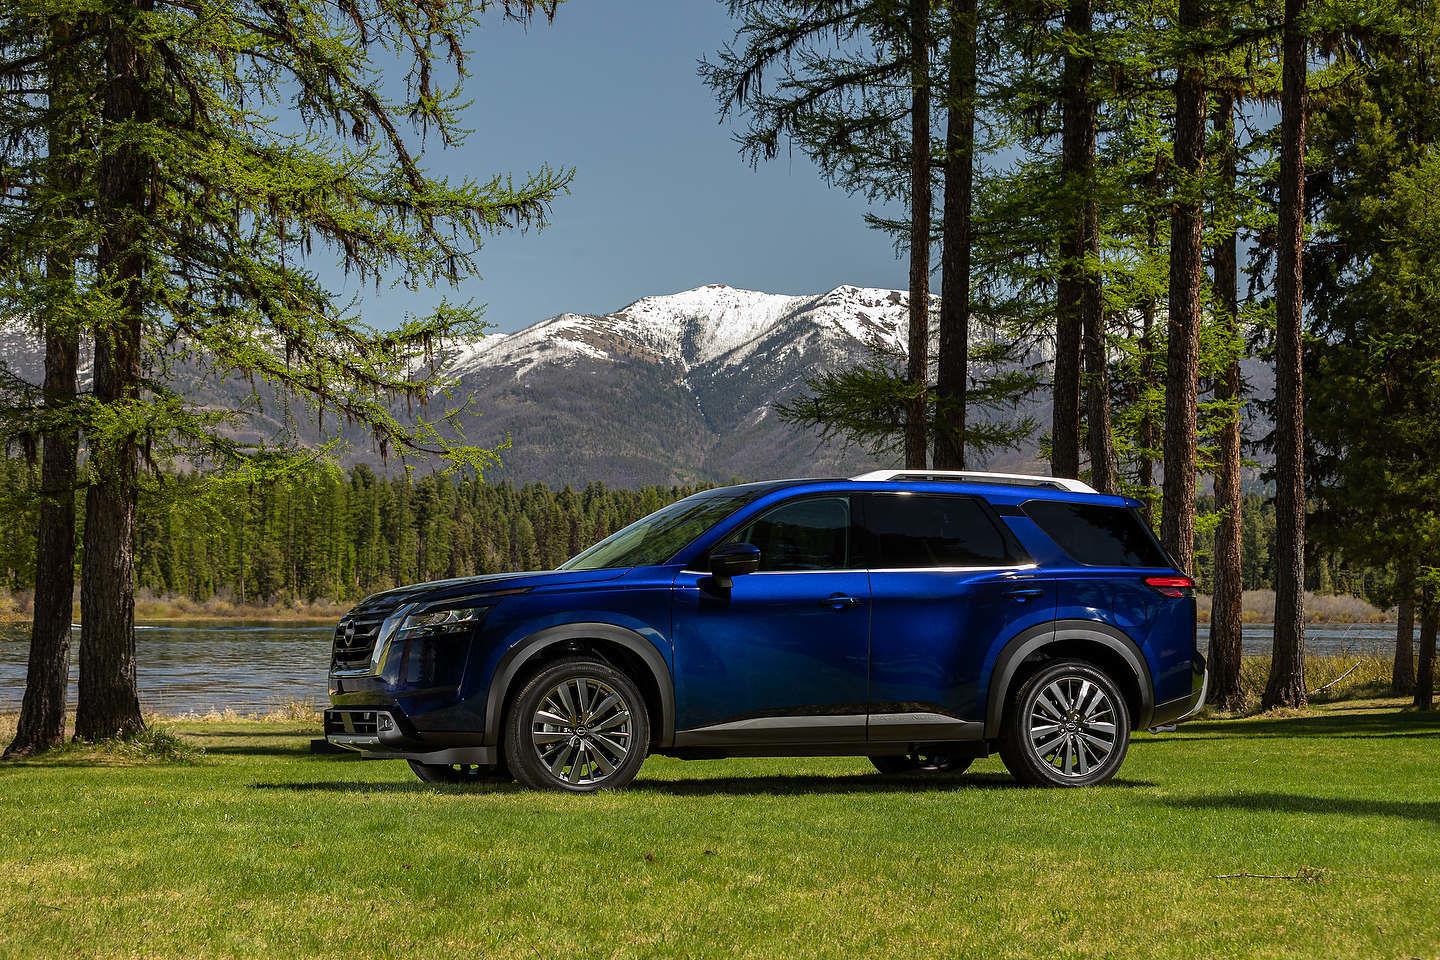 A look at how the 2022 Nissan Pathfinder improves everyday comfort